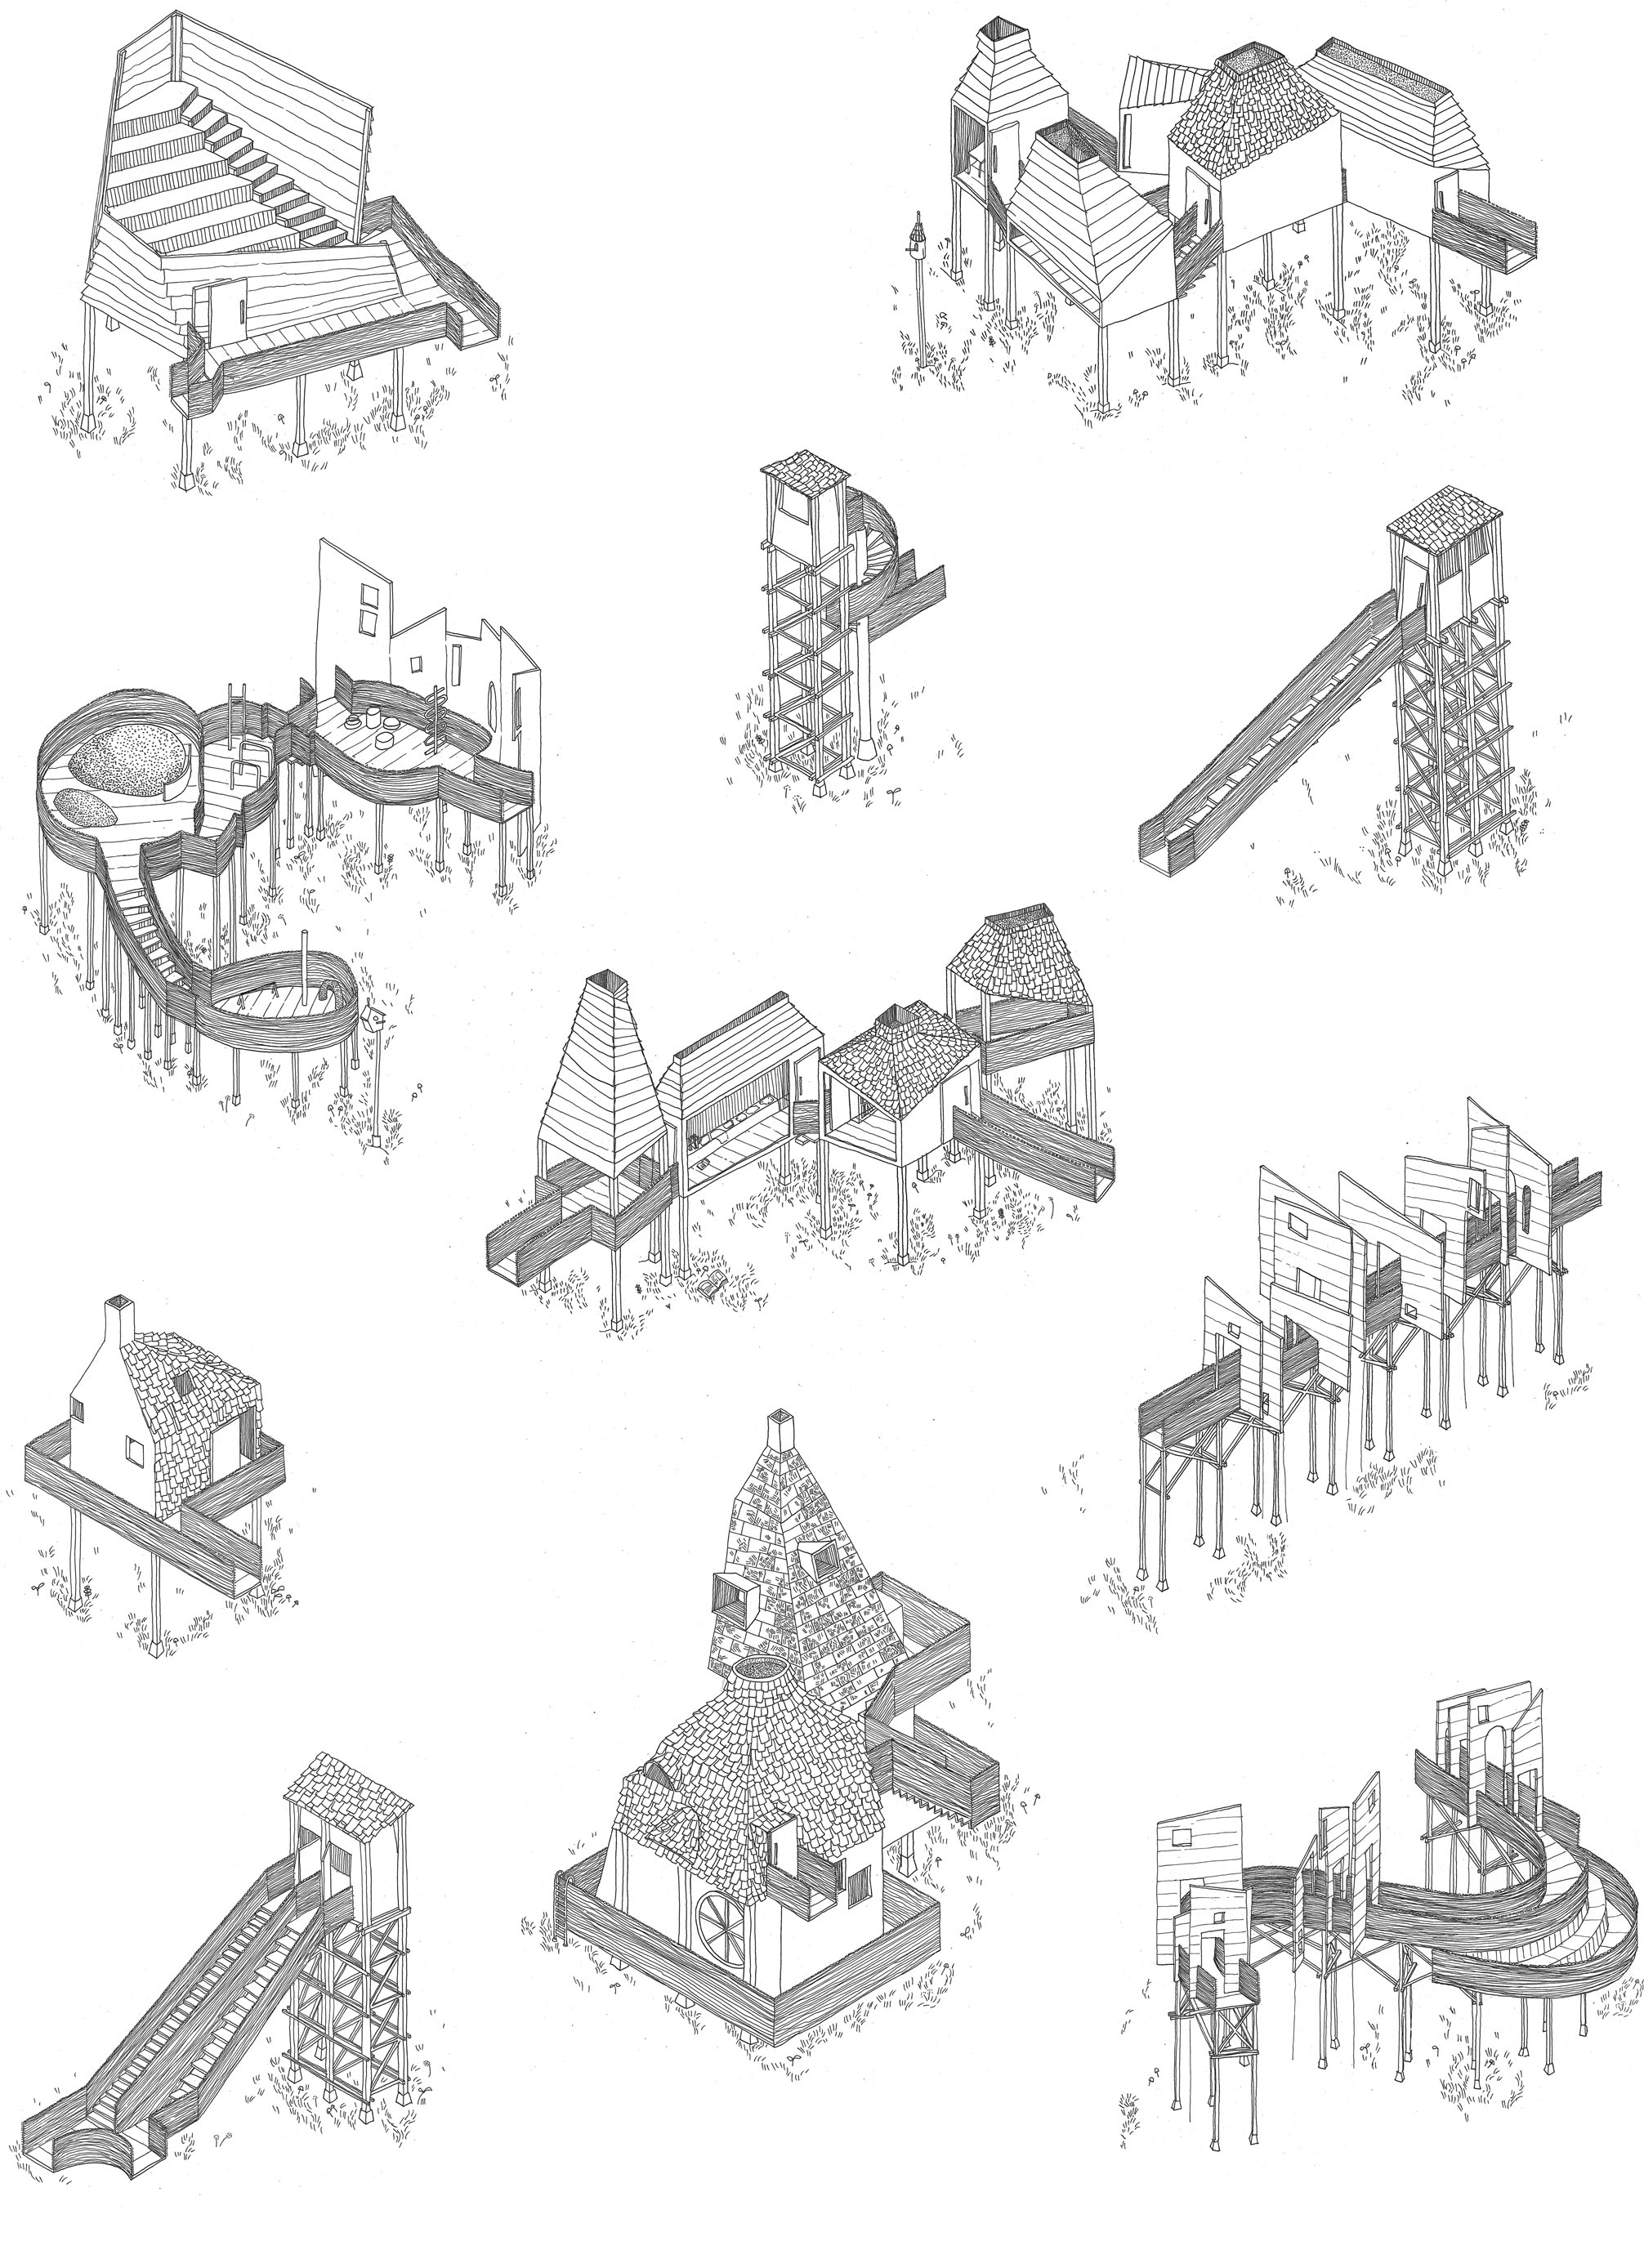 A series of illustrations of architectural proposition